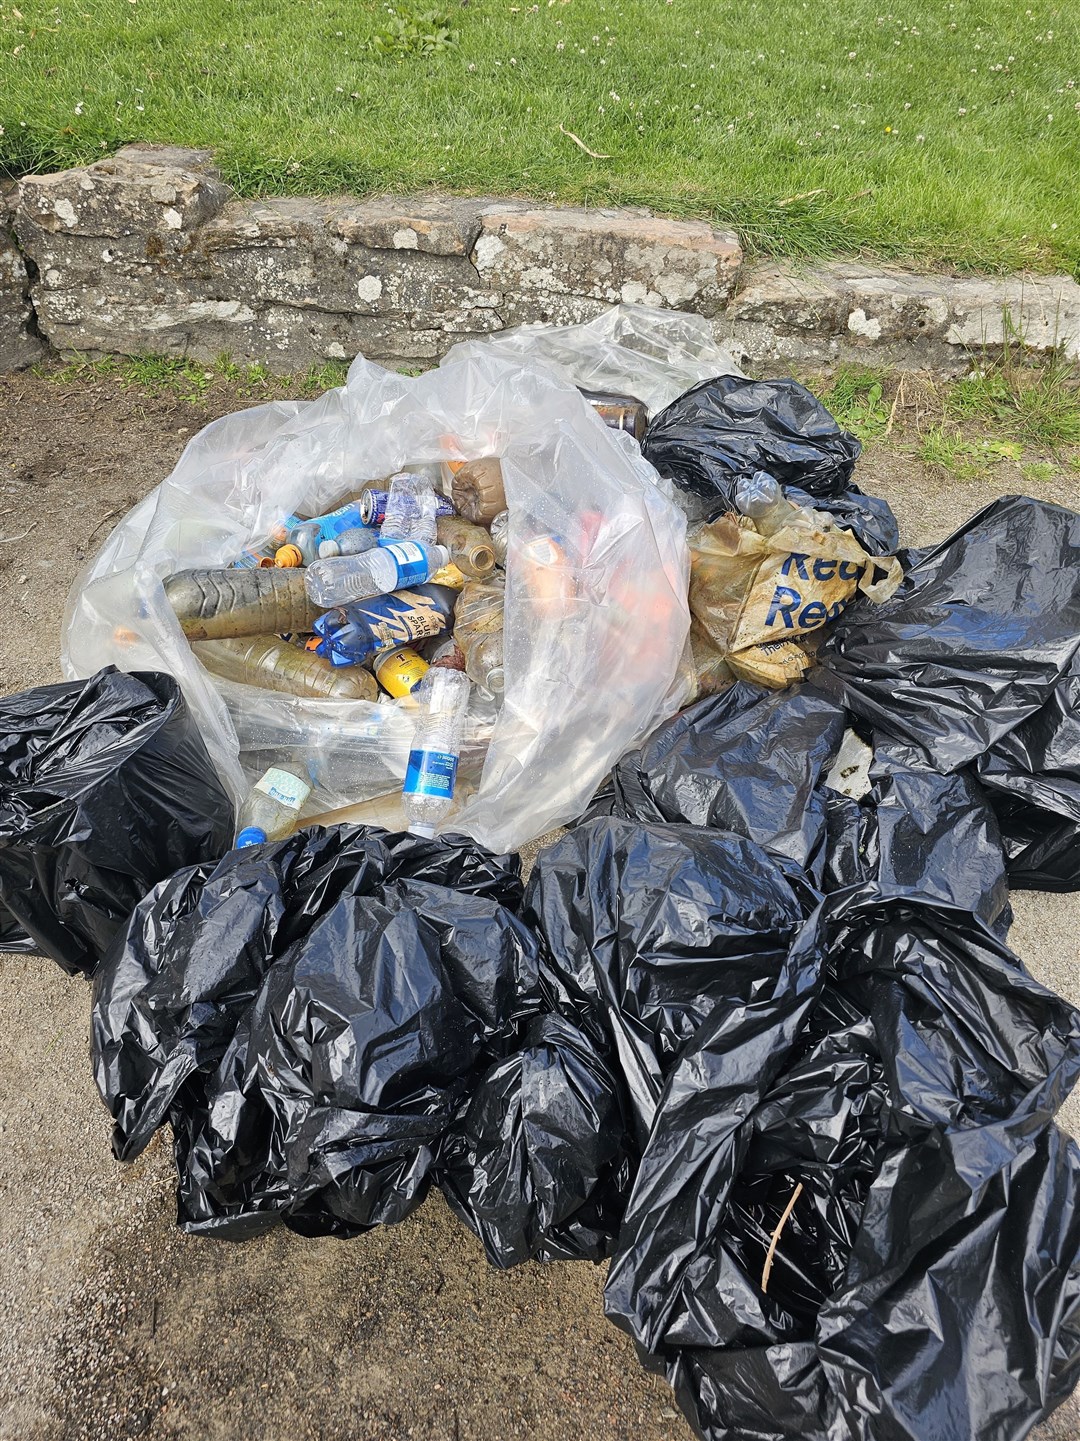 Just some of the rubbish collected.